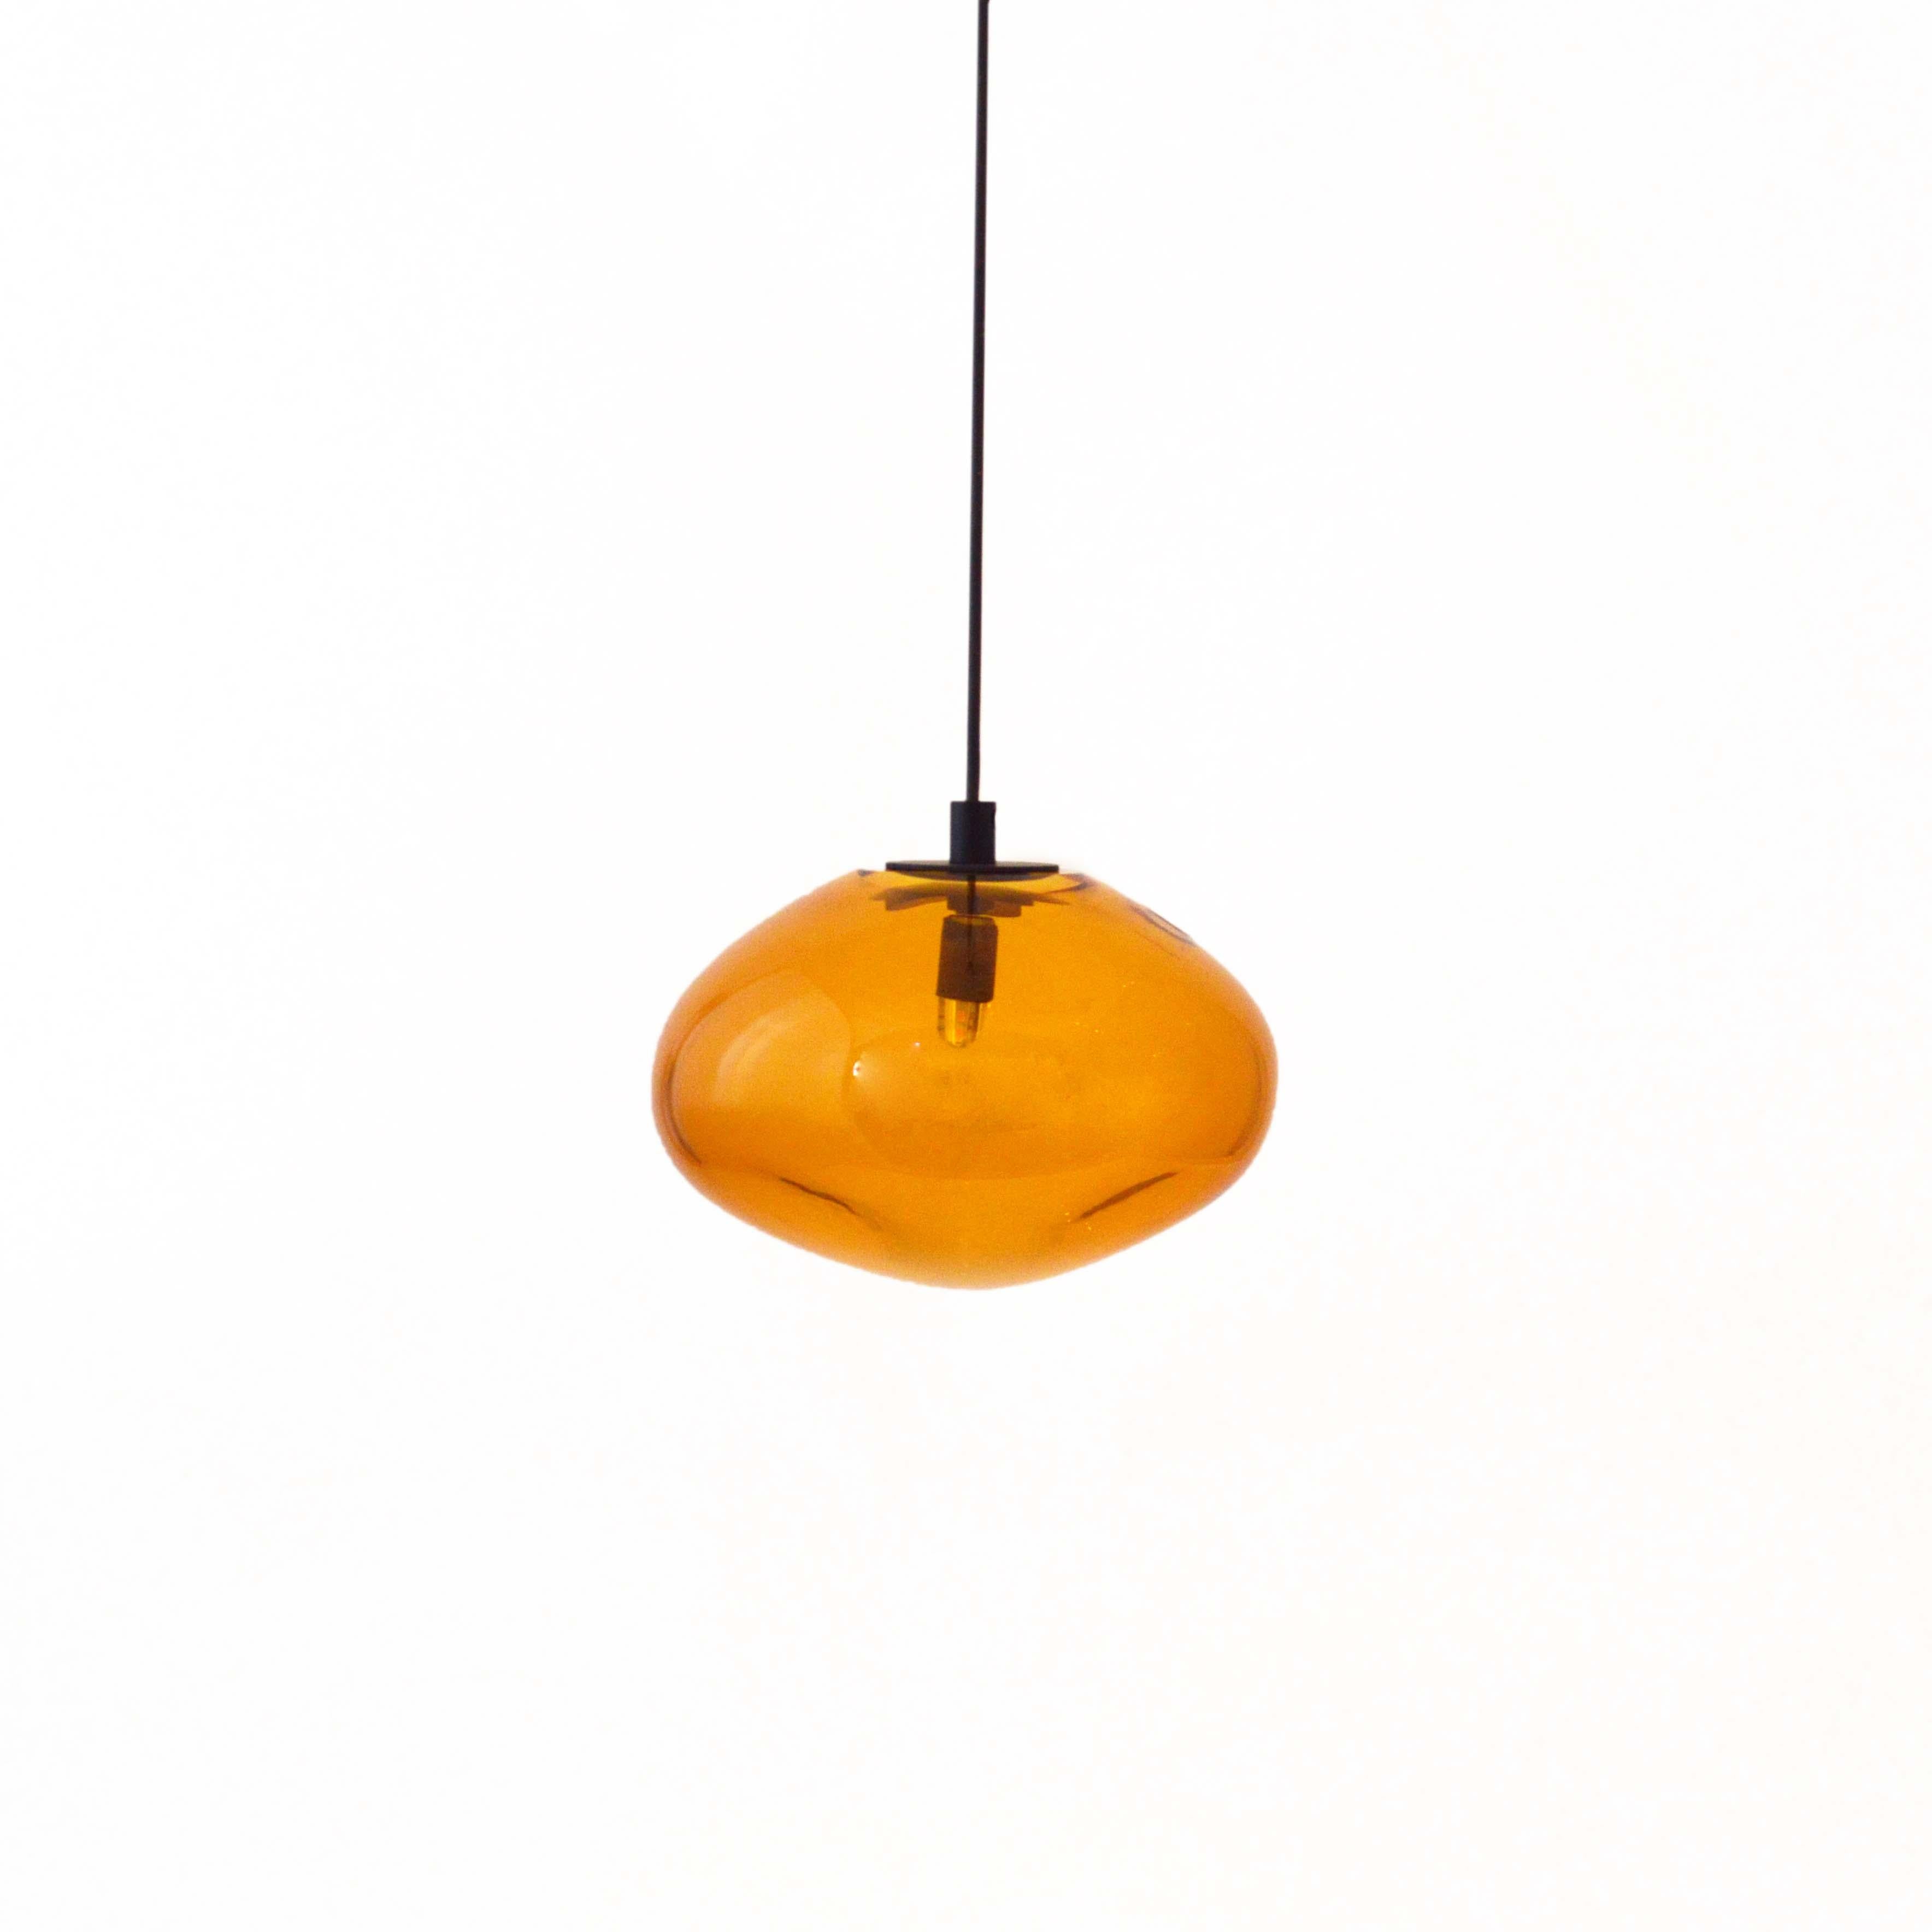 Starglow gold pendant by ELOA
No UL listed 
Material: glass, steel, silver
Dimensions: D15 x W13 x H100 cm
Also available in different colours and dimensions.

All our lamps can be wired according to each country. If sold to the USA it will be wired